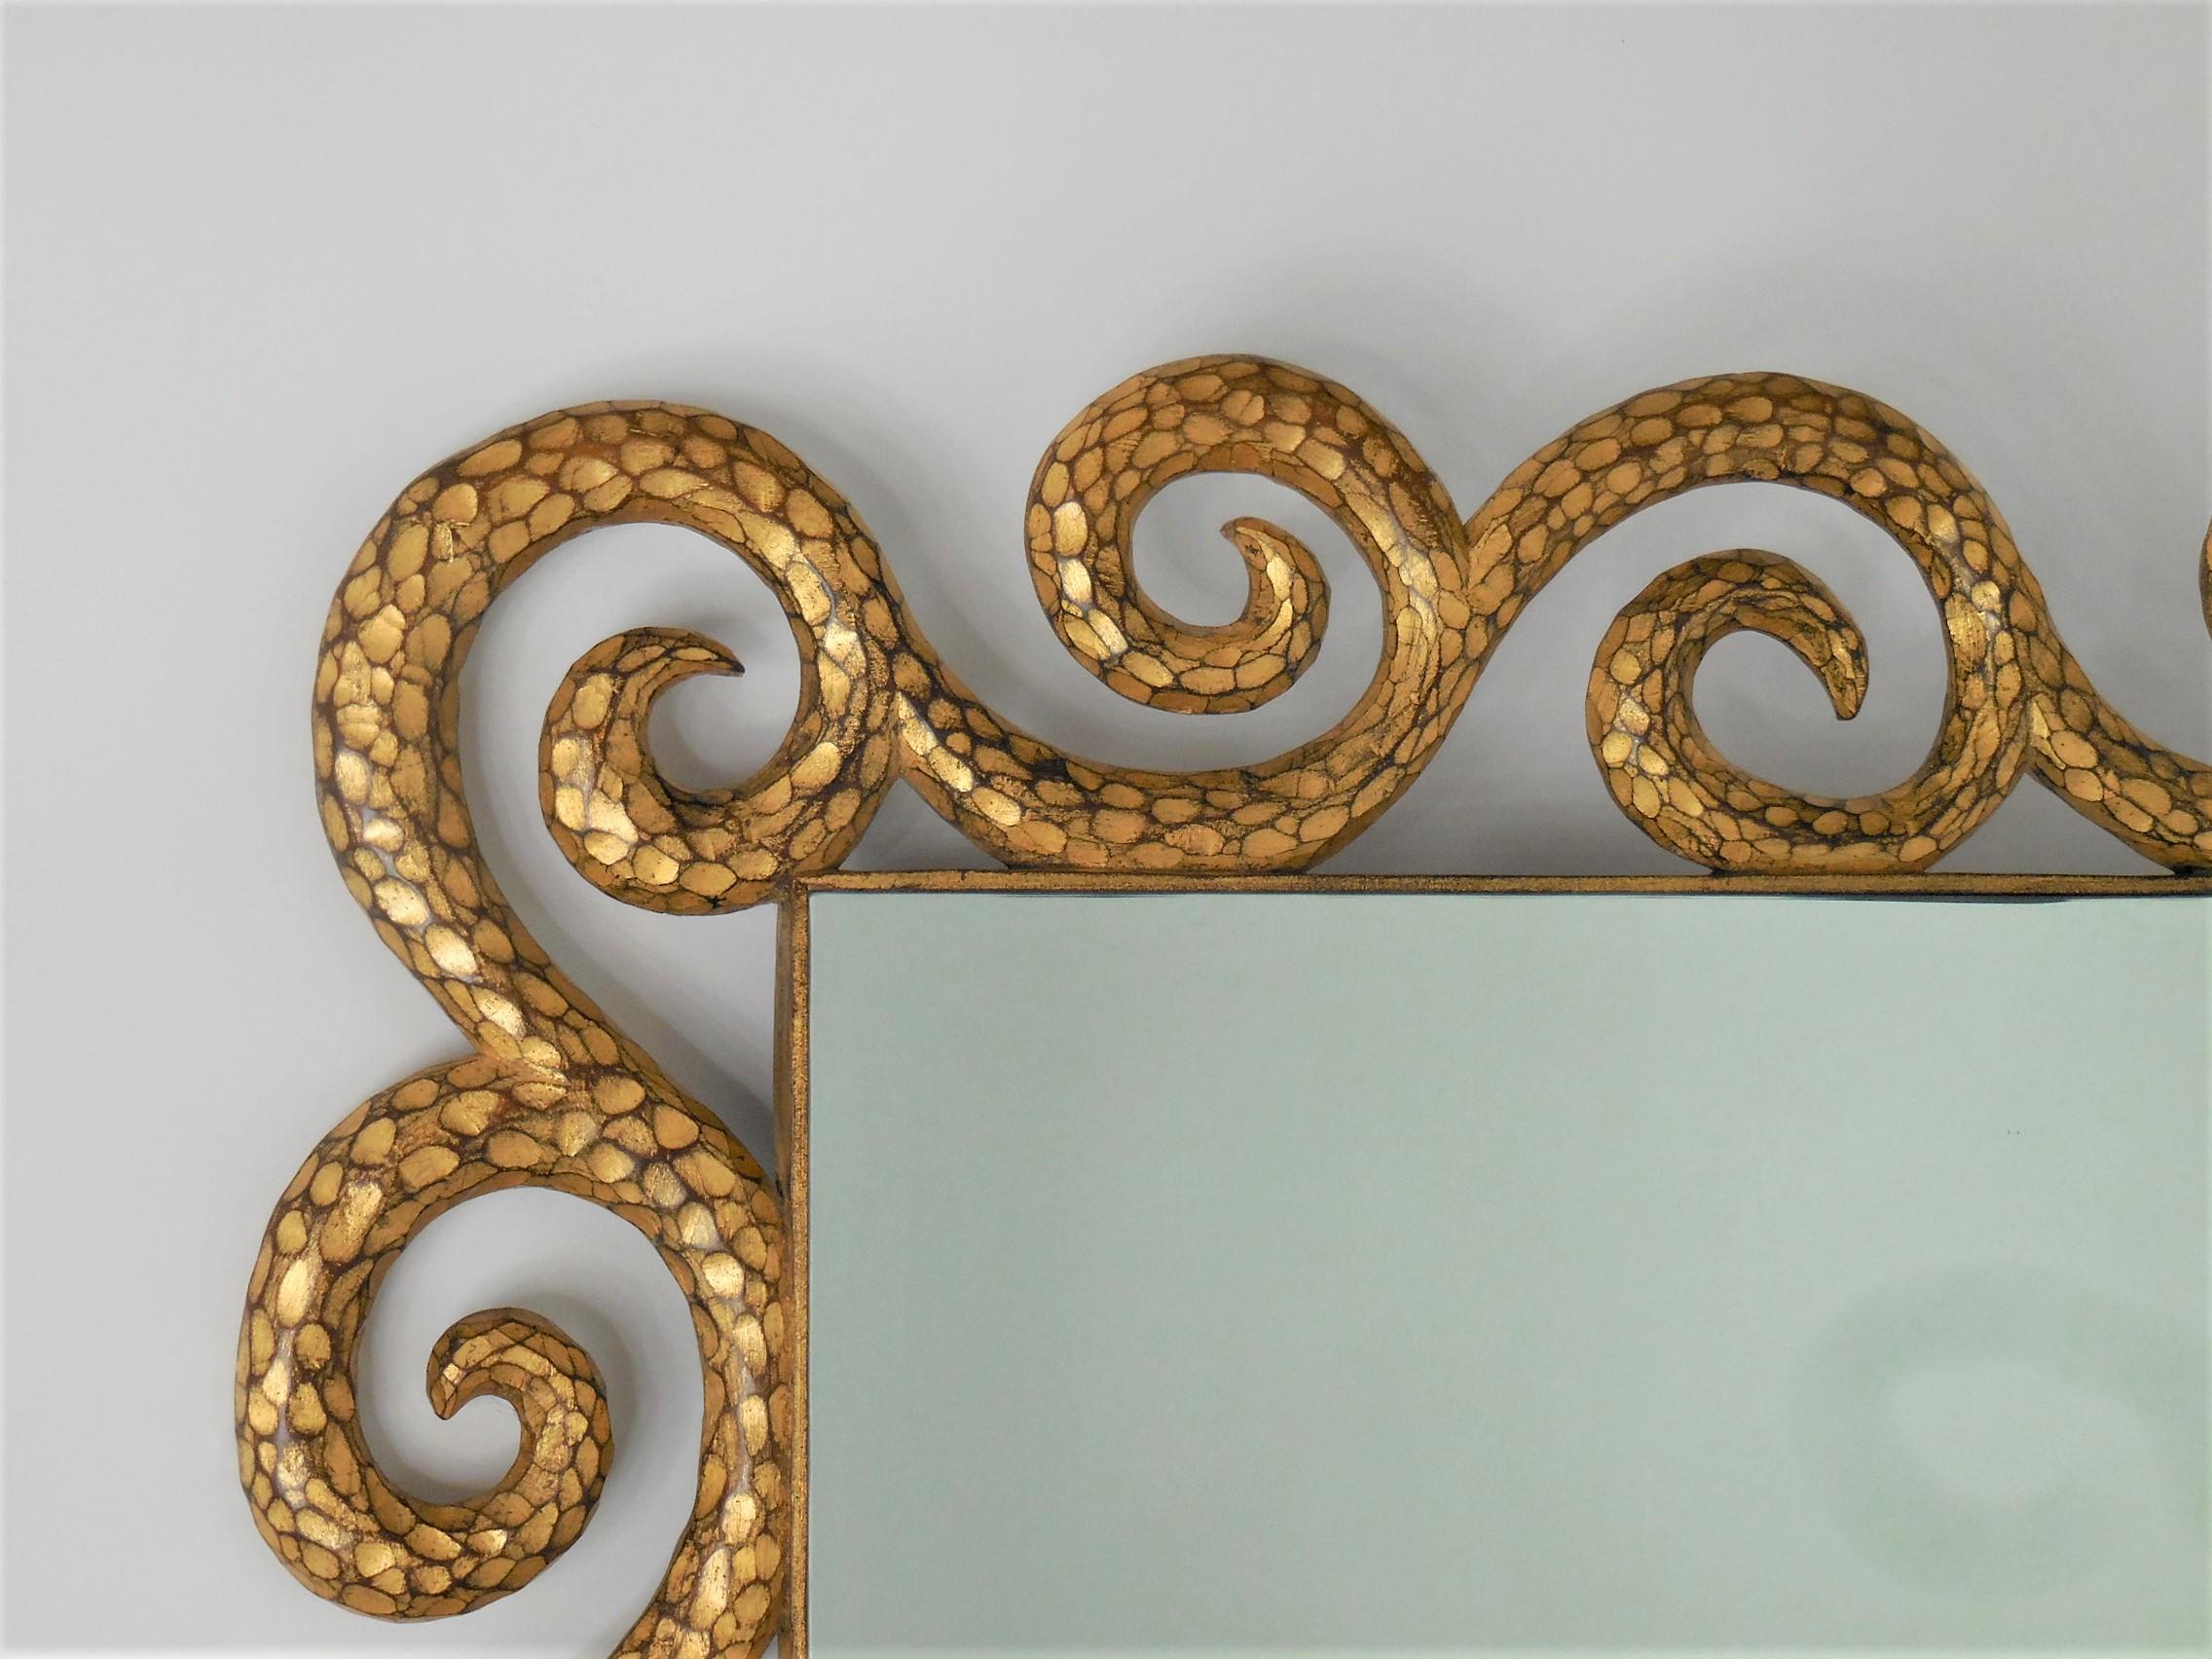 A large carved wood mirror in the surreal style of Garouste and Bonetti. The carved scrolling element has an organic feel that brings to mind baroque creations but presented in a definitely modern and fresh manner. Includes hanging mechanisms for